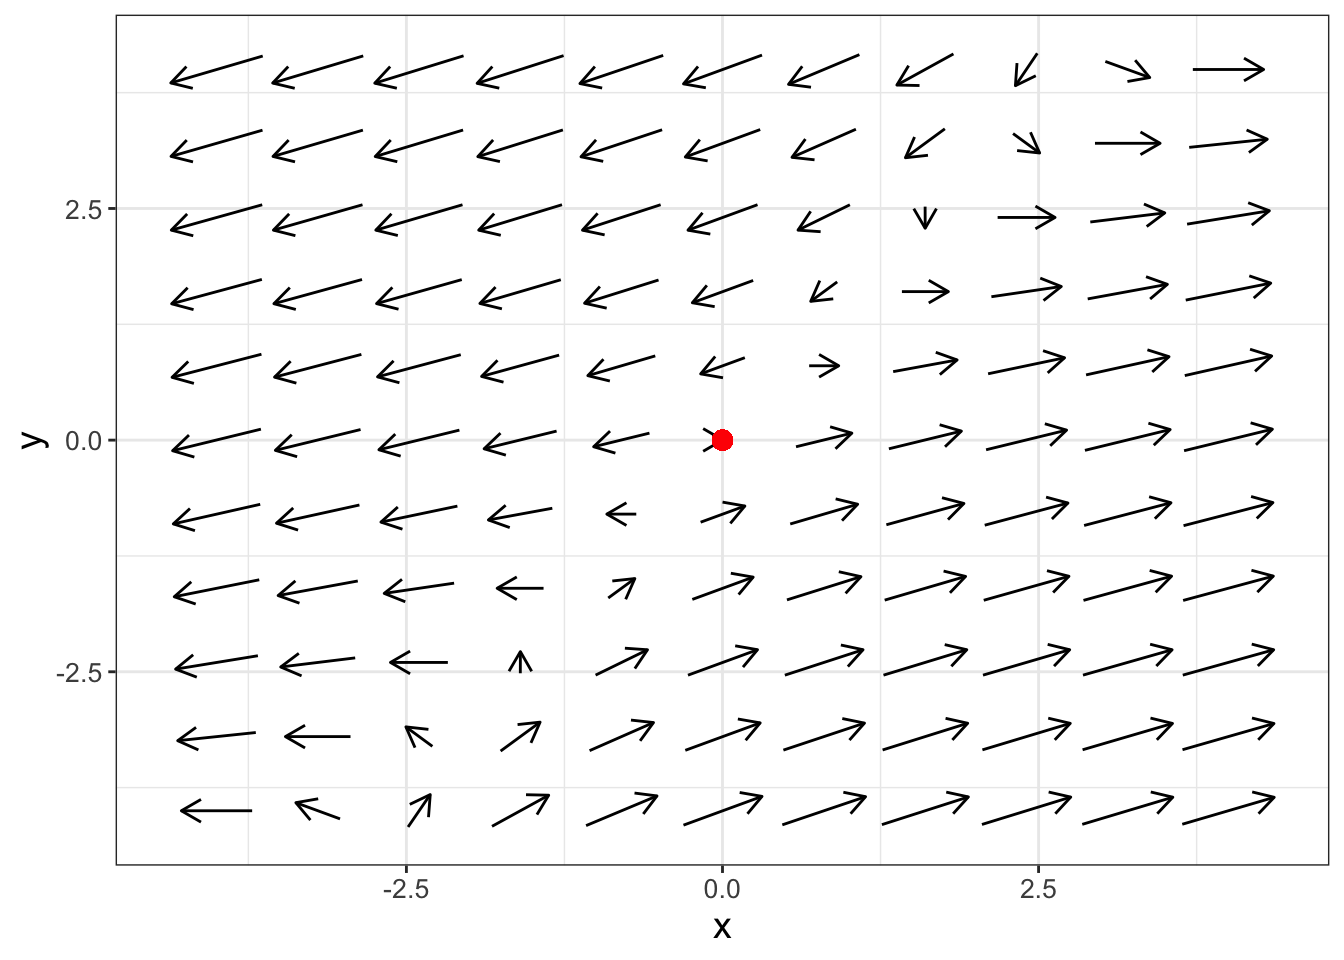 Phase plane for Equation \@ref(eq:saddle-ex-18), which shows the equilibrium solution is a saddle node.